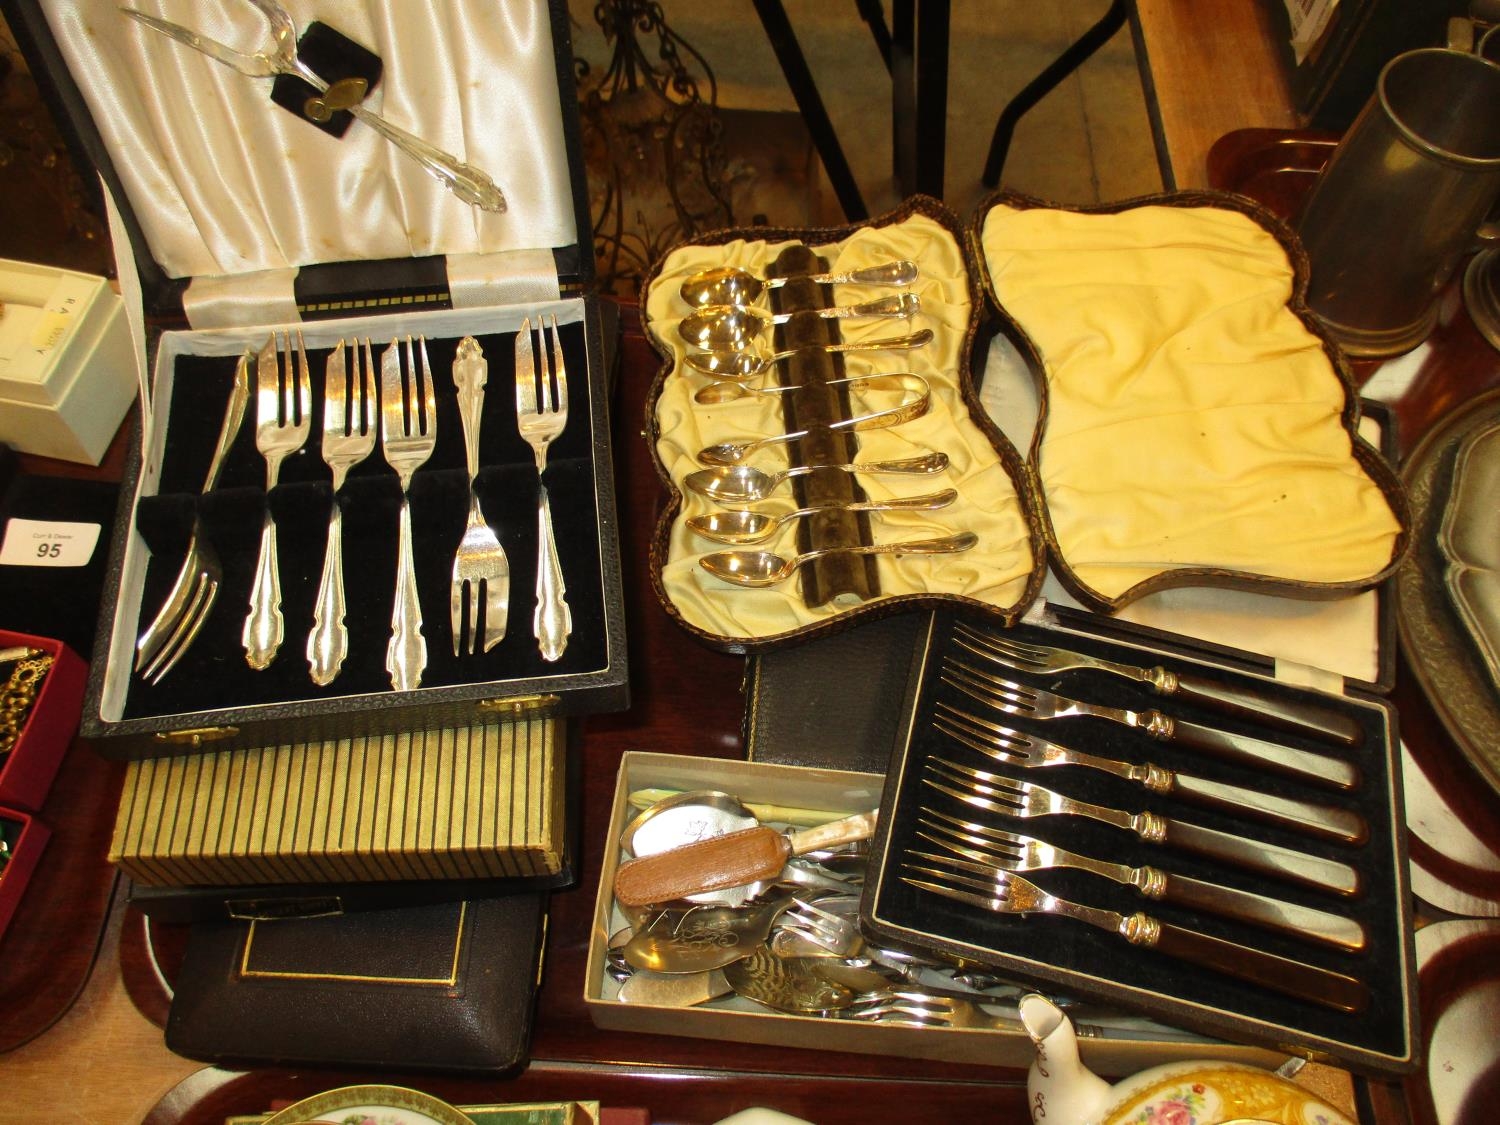 Cases of Cutlery and Servers, along with Loose Cutlery